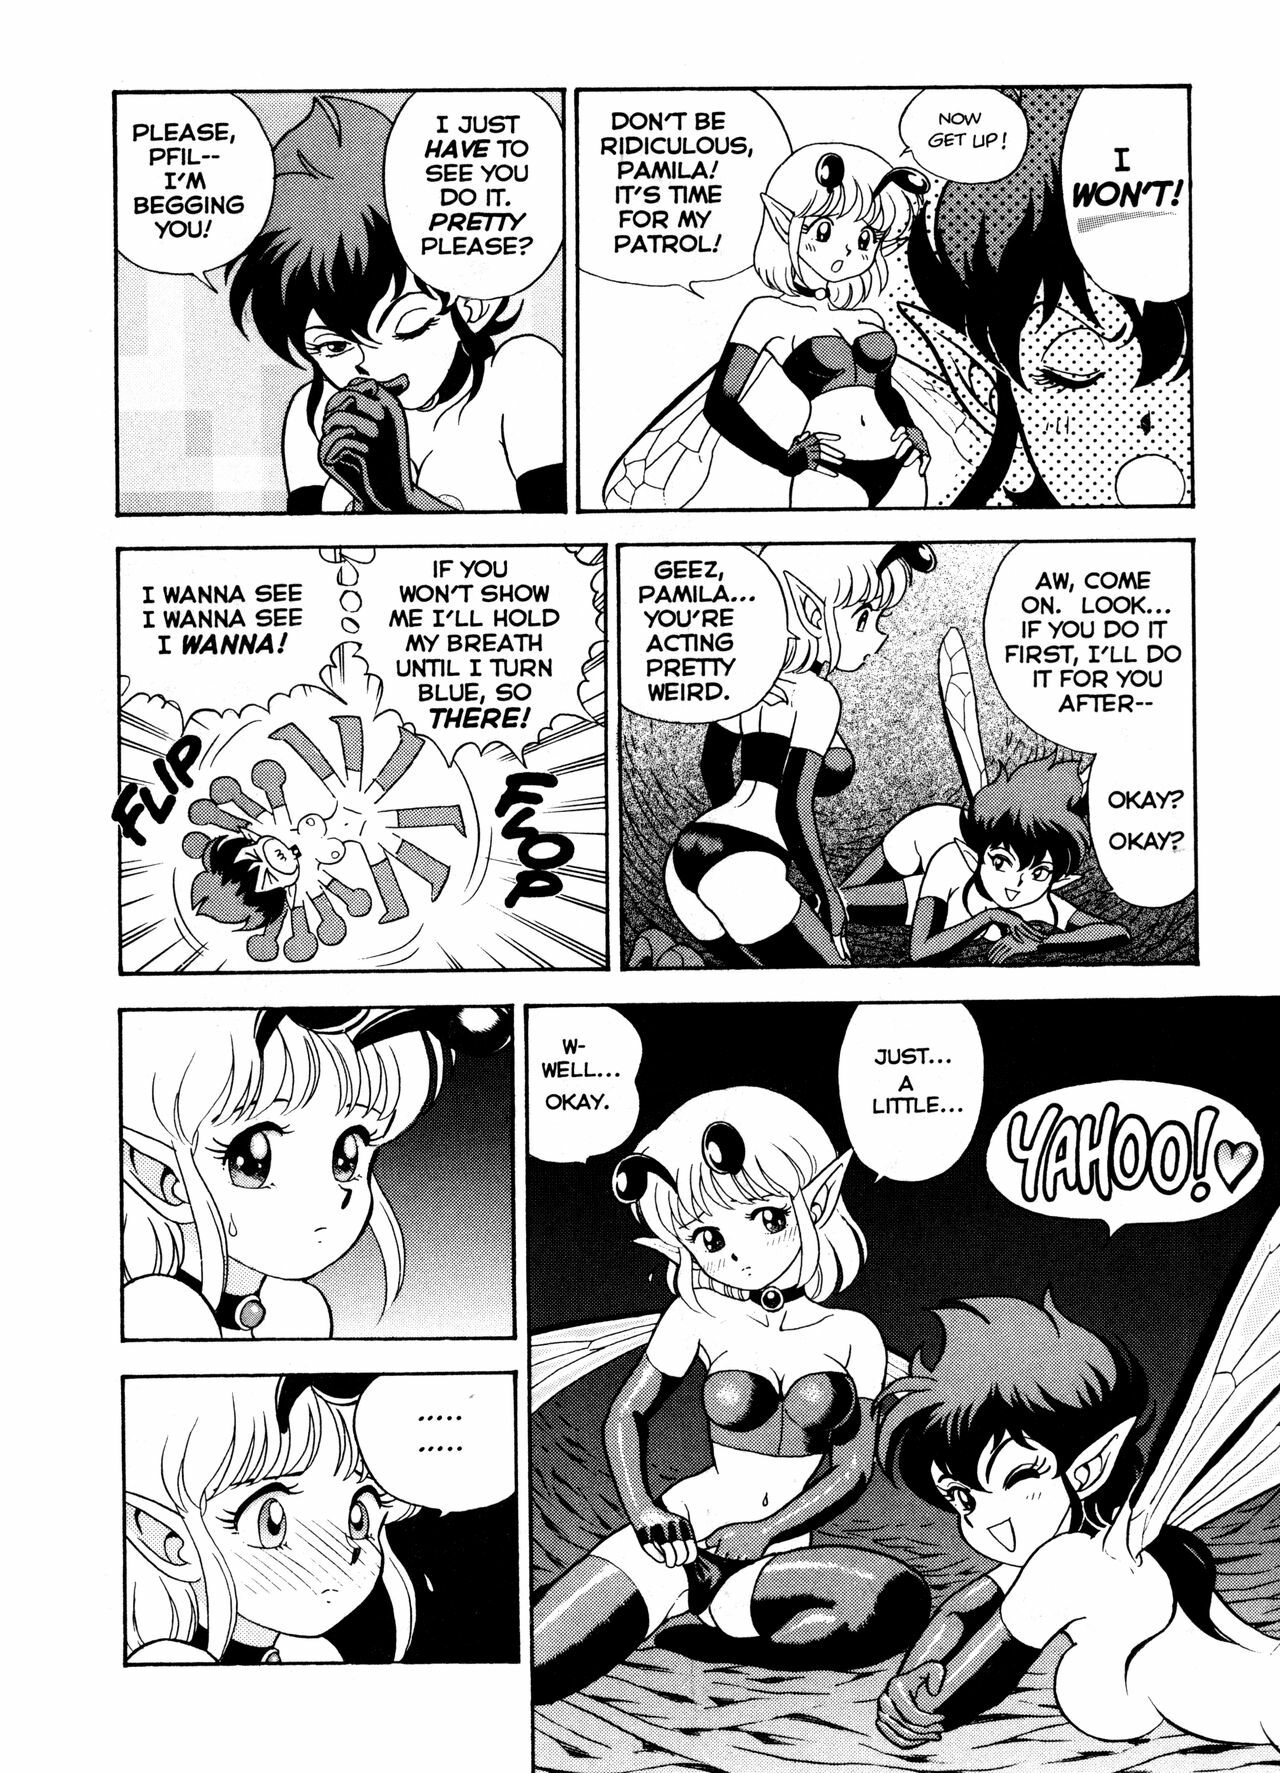 [Kondom] The New Bondage Fairies Issue 15 [ENG][Hi-Res] page 9 full